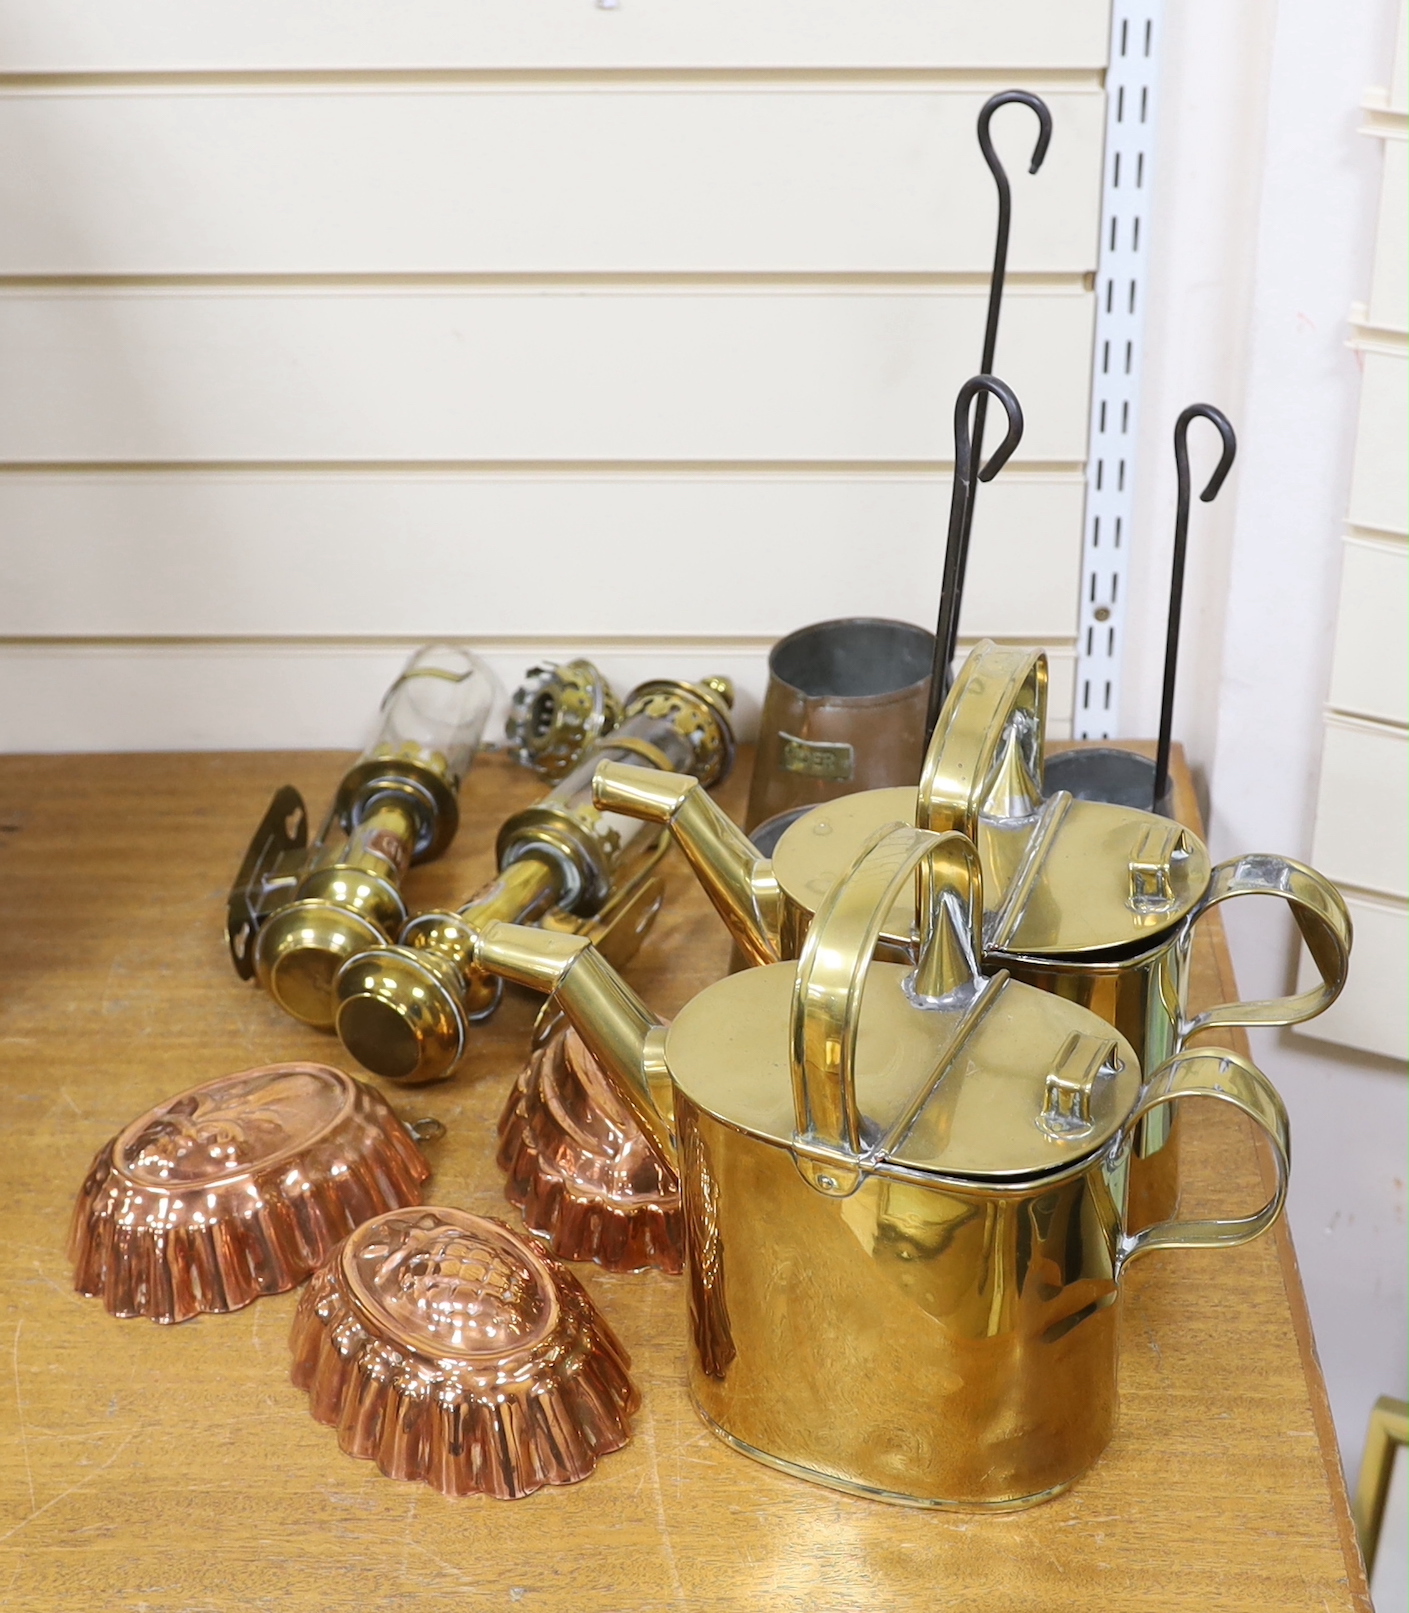 Two brass watering cans, two brass GWR carriage lamps, three copper Cider measures and three copper jelly moulds, GWR lights 36cm high